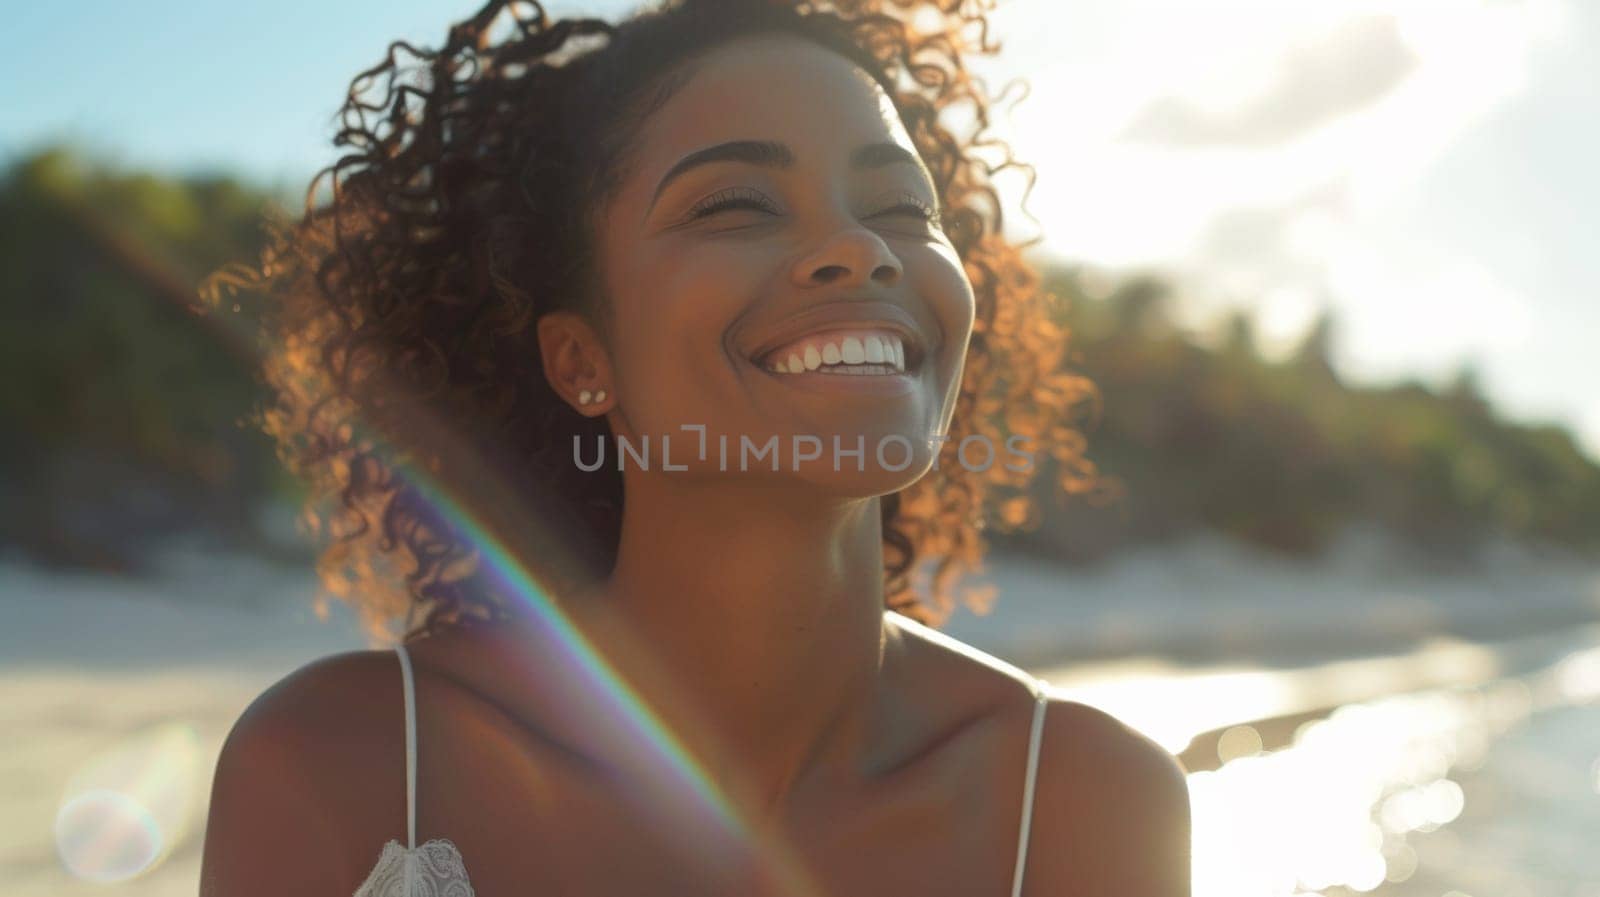 A woman with curly hair smiling at the camera on a beach, AI by starush